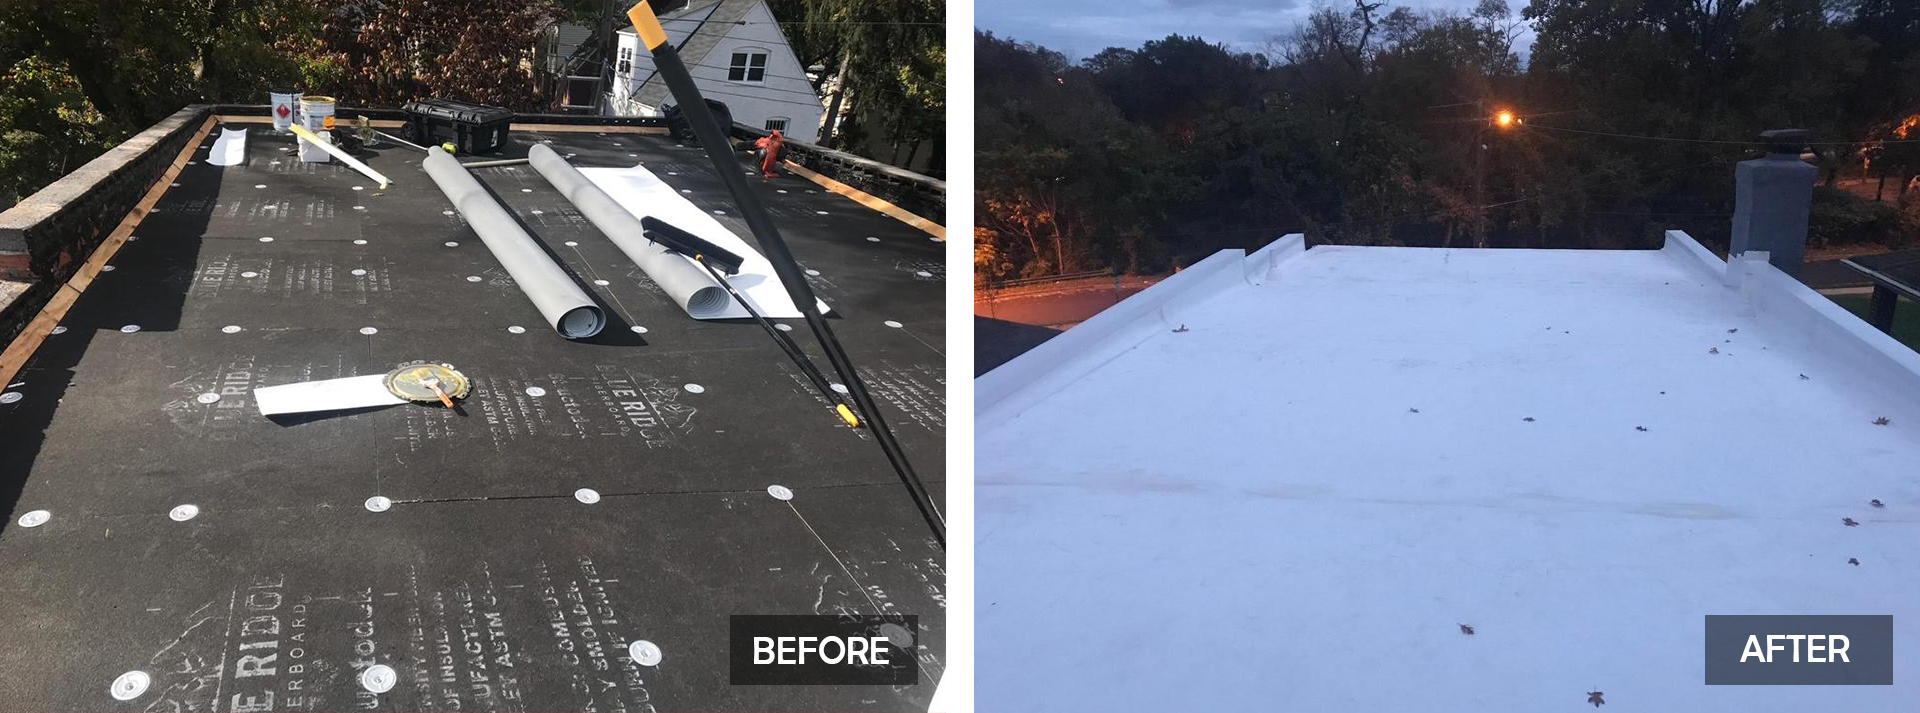 Roofing (Before / After)